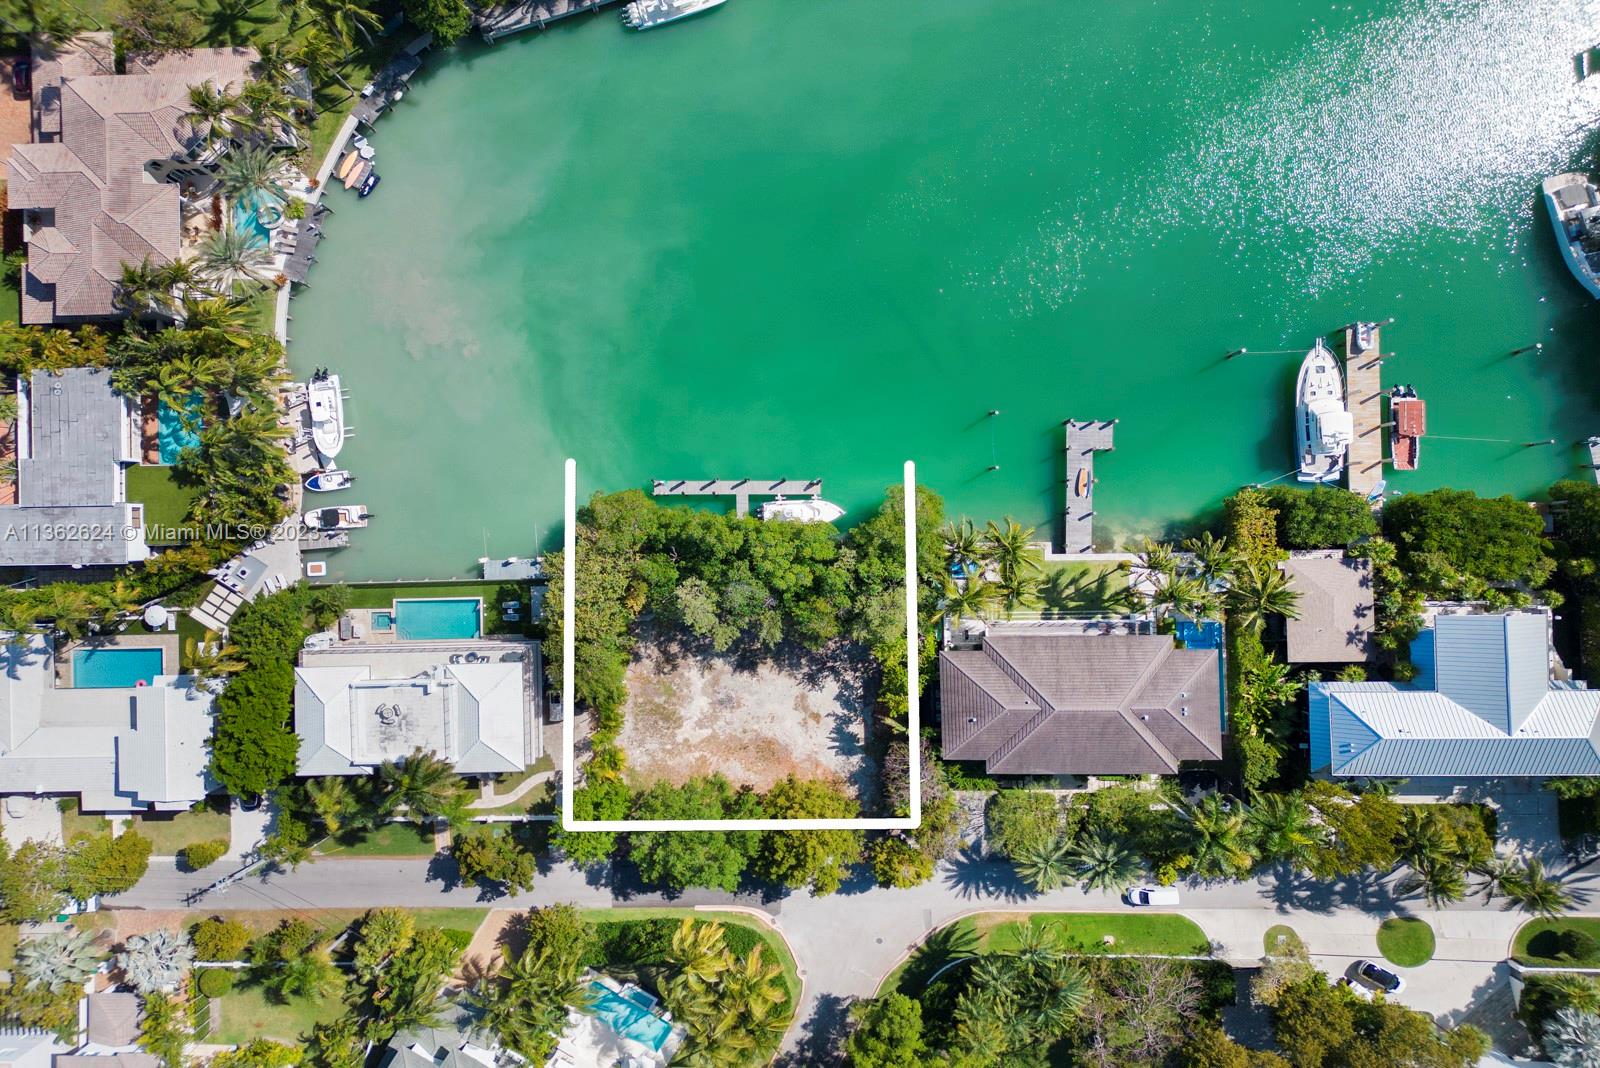 Waterfront Lot ready to build.  .25 of an acre with brand new dock.   Can fit up to a 105 Ft Vessel.  Only vacant lot available on Key Biscayne.  Tucked away inside highly desirable hurricane harbor with deep water, very protected, and wide lagoon views makes this is true boaters paradise.  Combine that with building your dream house makes this unique opportunity a reality for your pickiest end user and/or investor alike.  Easy to show.